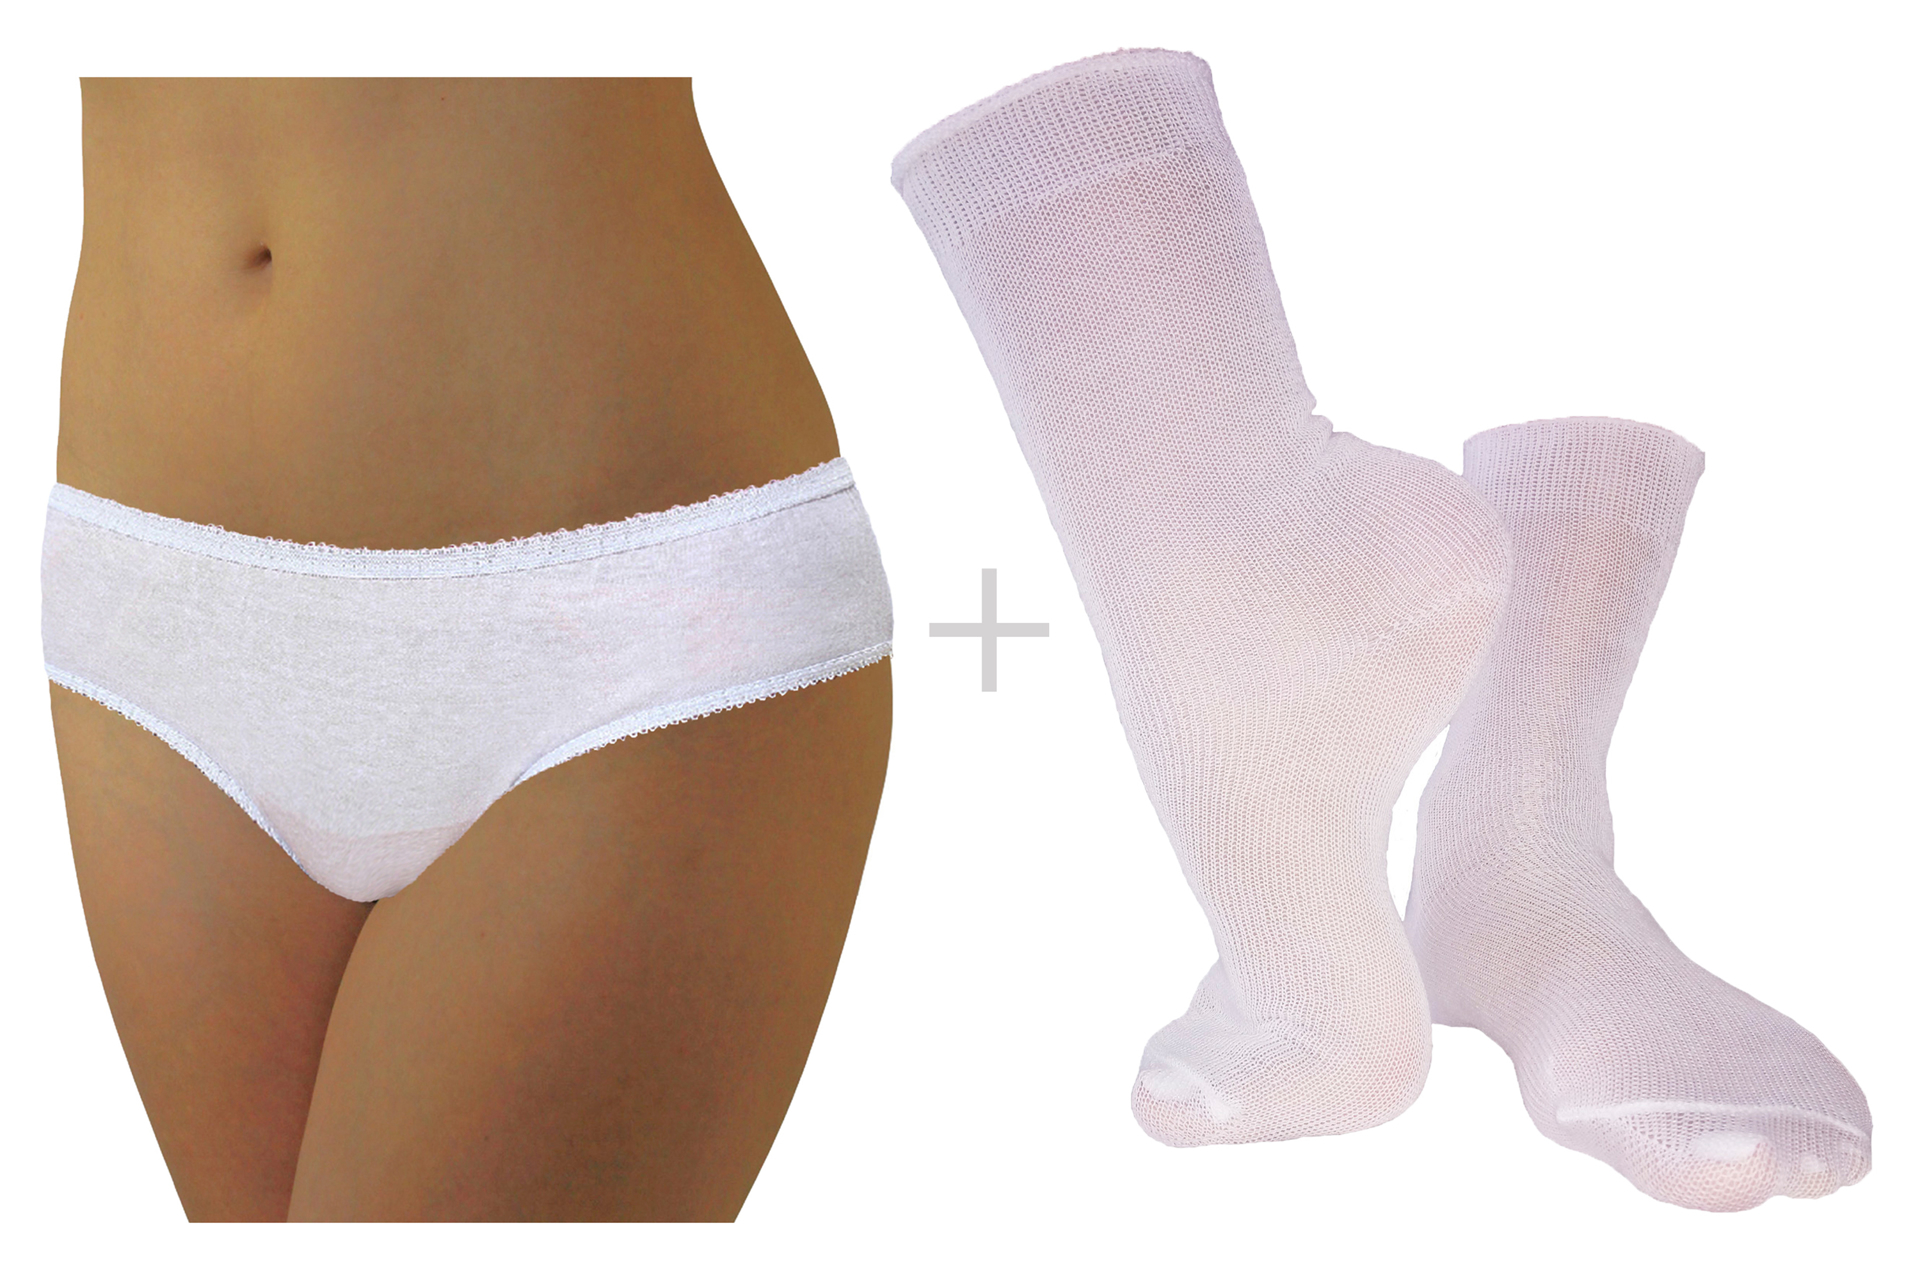 Underworks Underworks Combo - Women Panties and Crew Socks -10-Pack of  Womens Disposable 100% Cotton Underwear and 10-Pack of Disposable Crew  Socks 